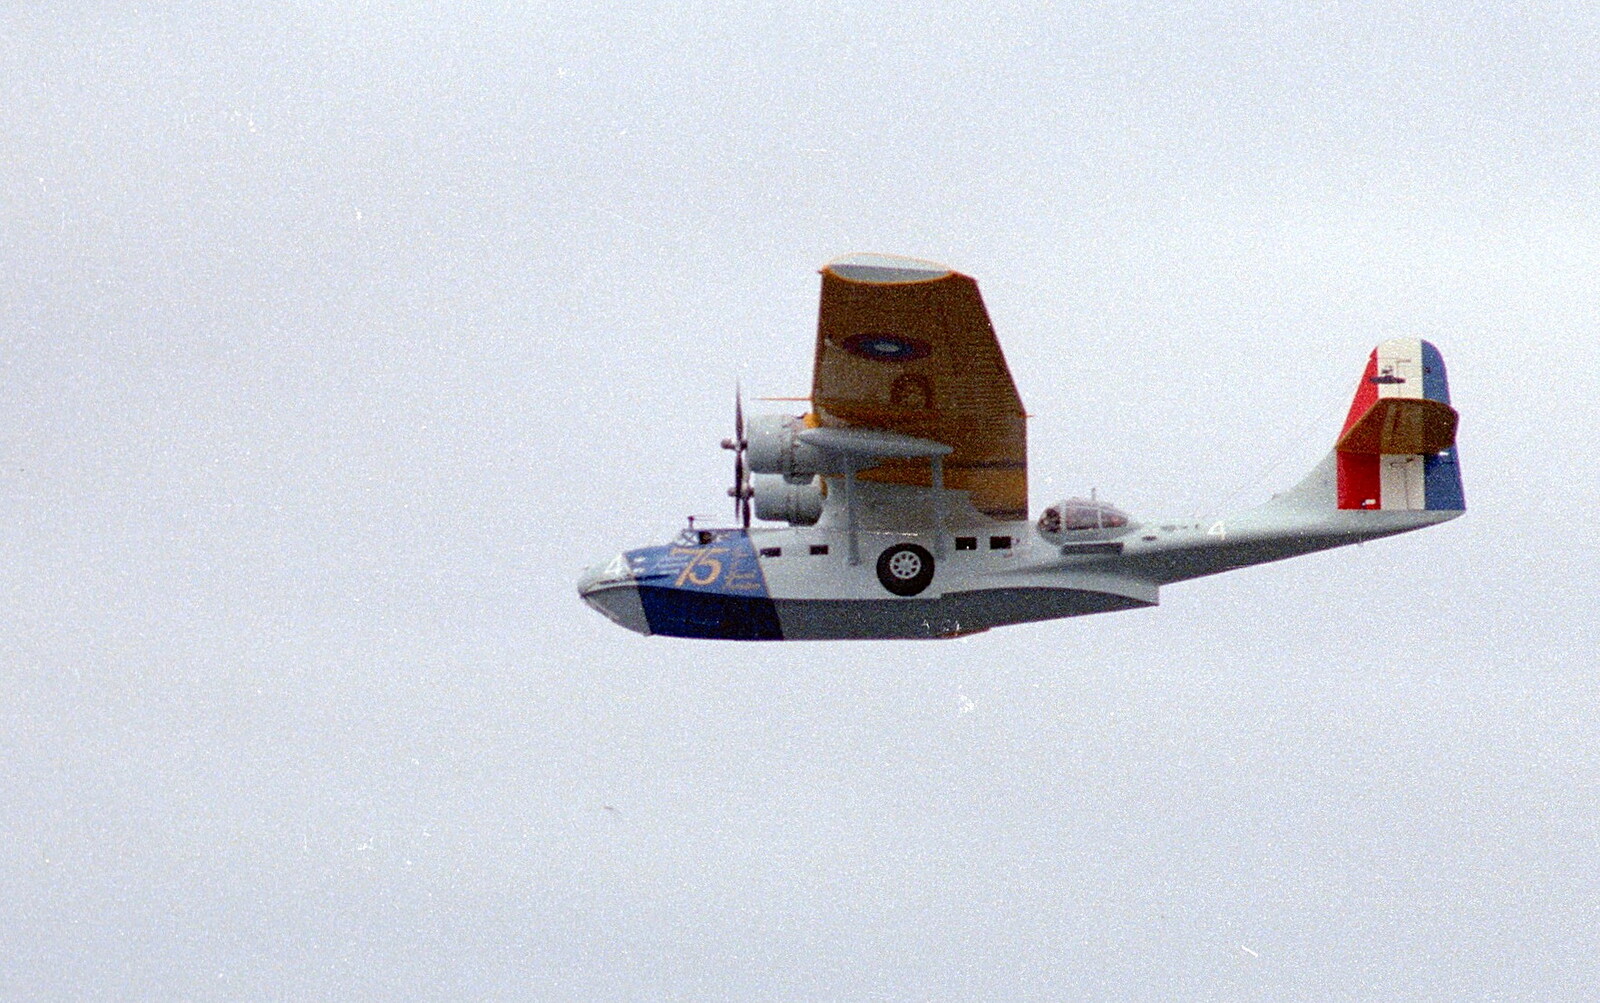 Uni: The Navy-Curtiss NC-4 Trans-Atlantic Flight, Plymouth Sound - 31st May 1986: The Catalina flying boat does a close pass